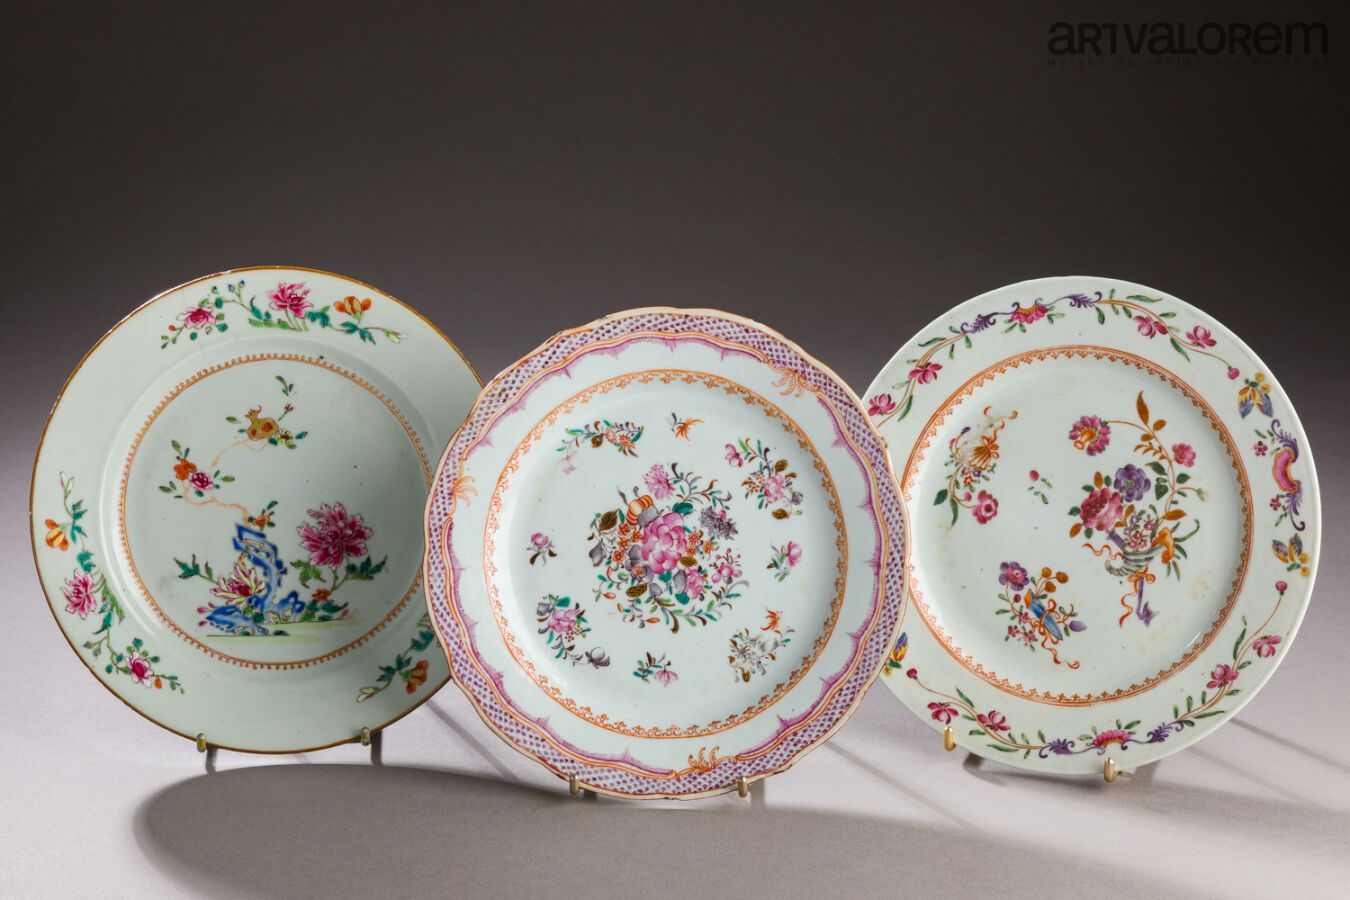 Null CHINA, Compagnie des Indes, 18th century

Set of three plates with polychro&hellip;